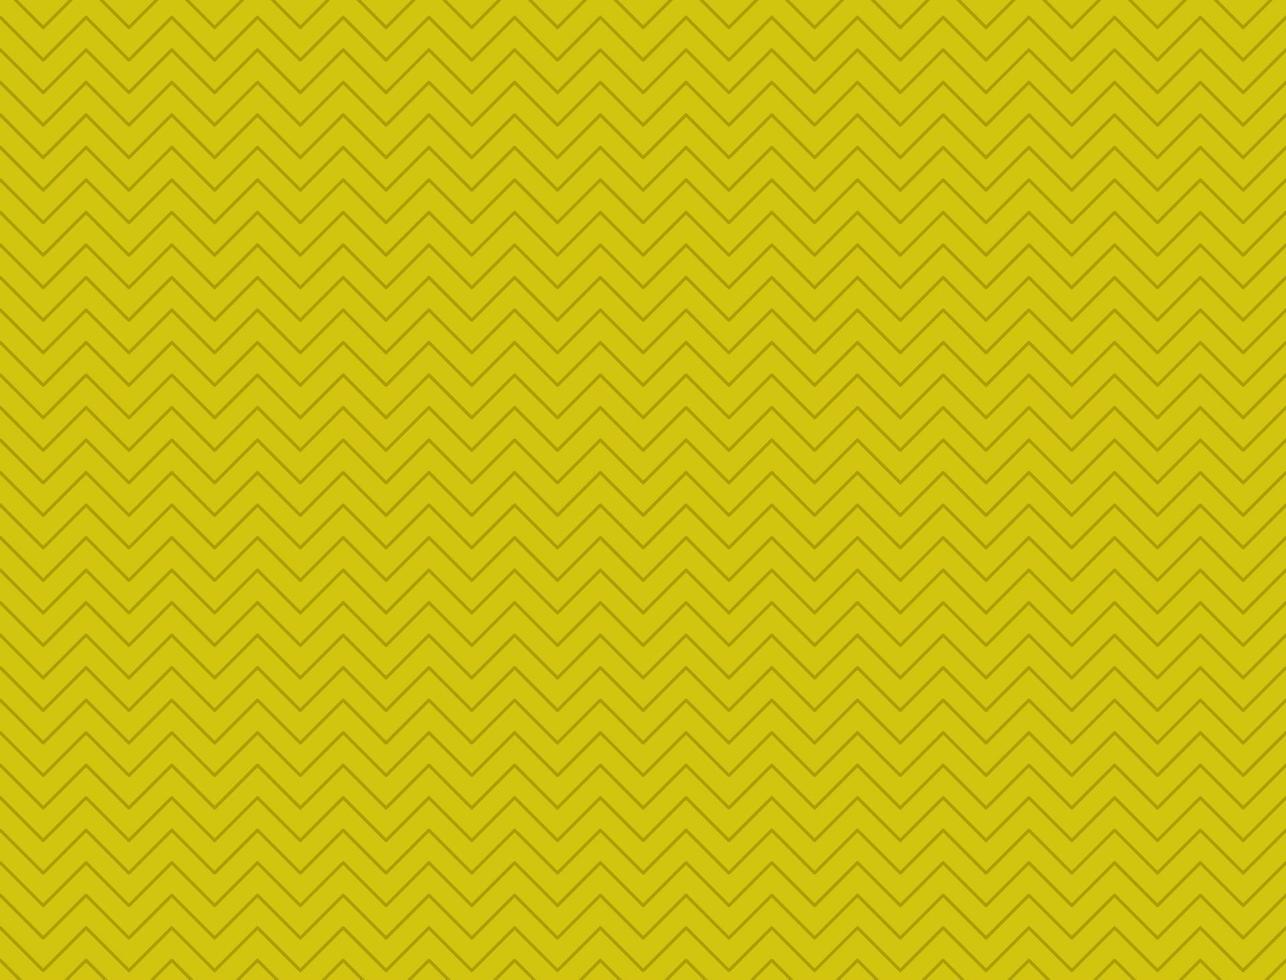 Abstract background with yellow color and wavy lines vector